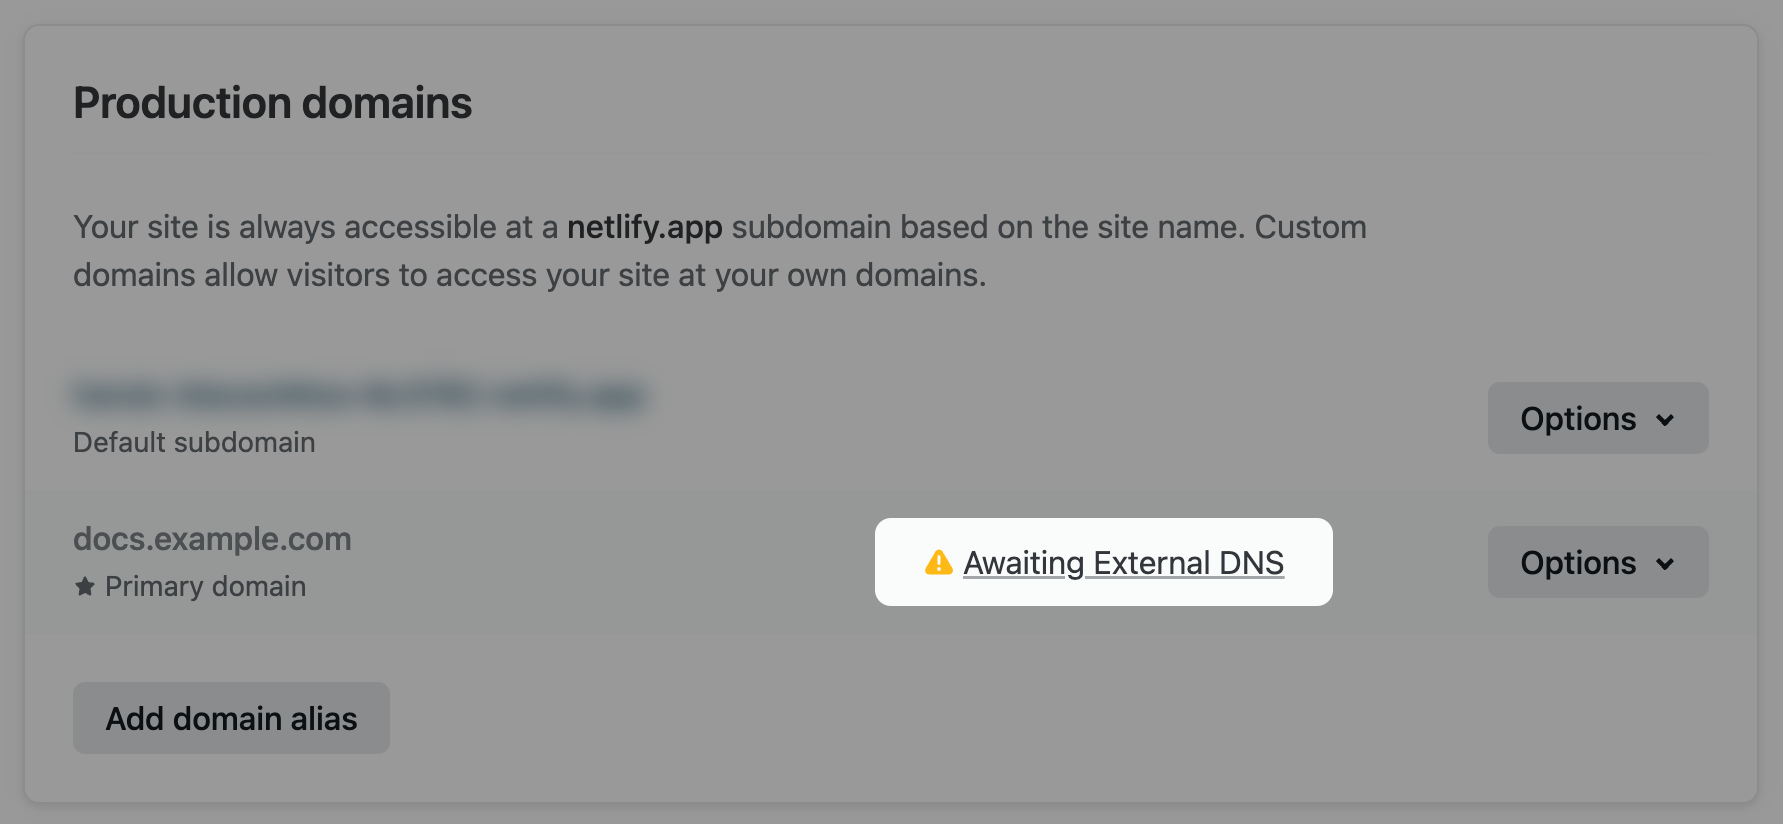 The link is between the domain name and the options menu.